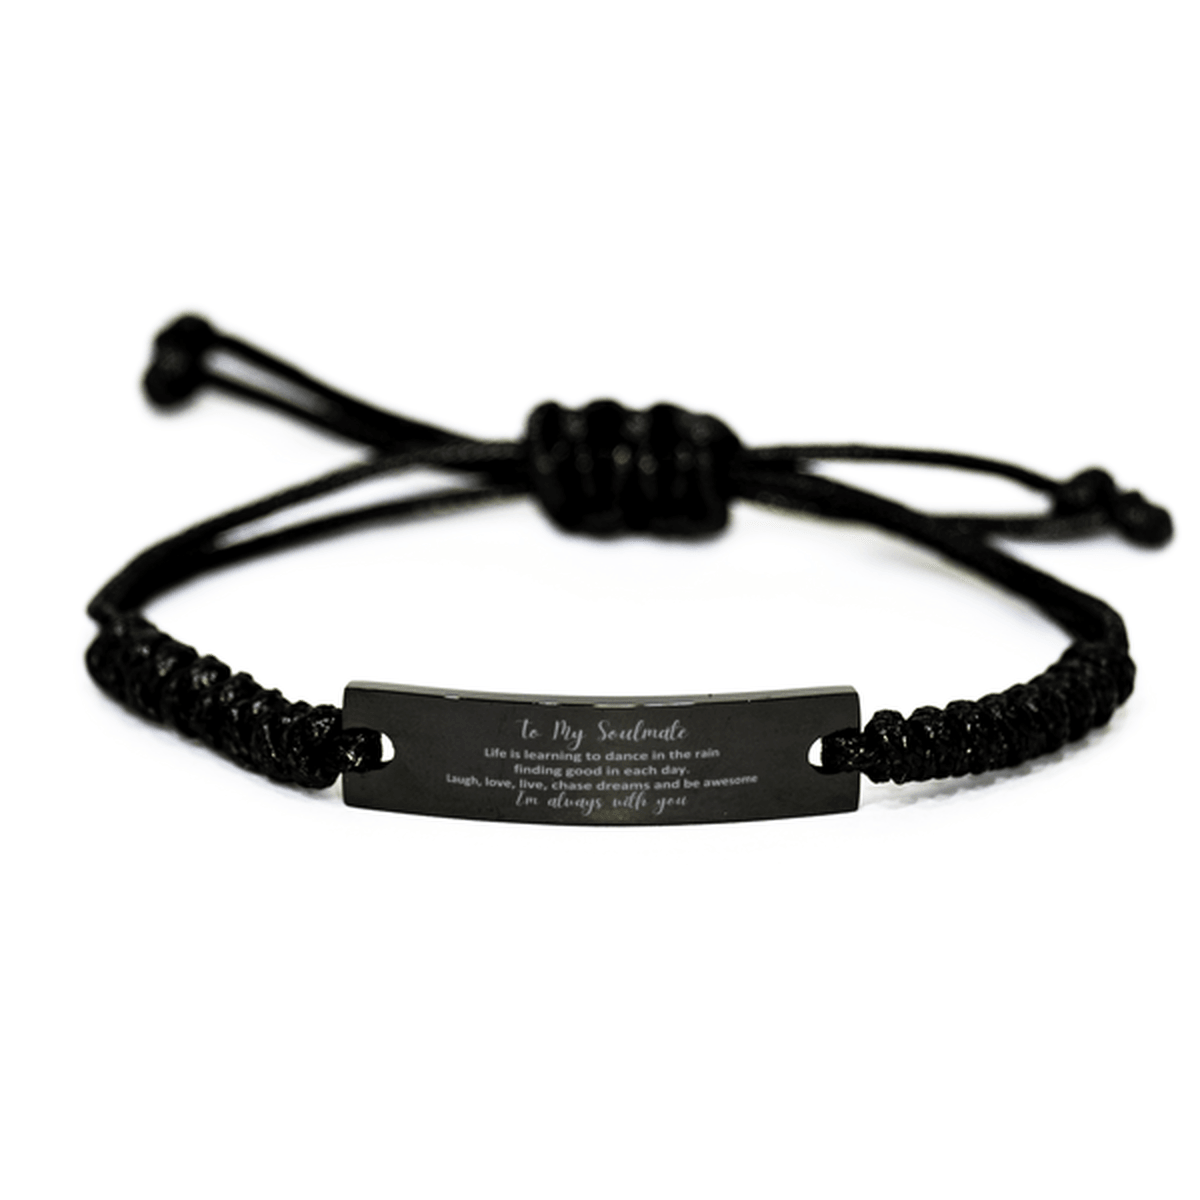 Heartfelt Soulmate Engraved Black Leather Rope Bracelet - Life is Learning to Dance in the Rain, I'm always with you- Birthday, Christmas Holiday Gifts - Mallard Moon Gift Shop